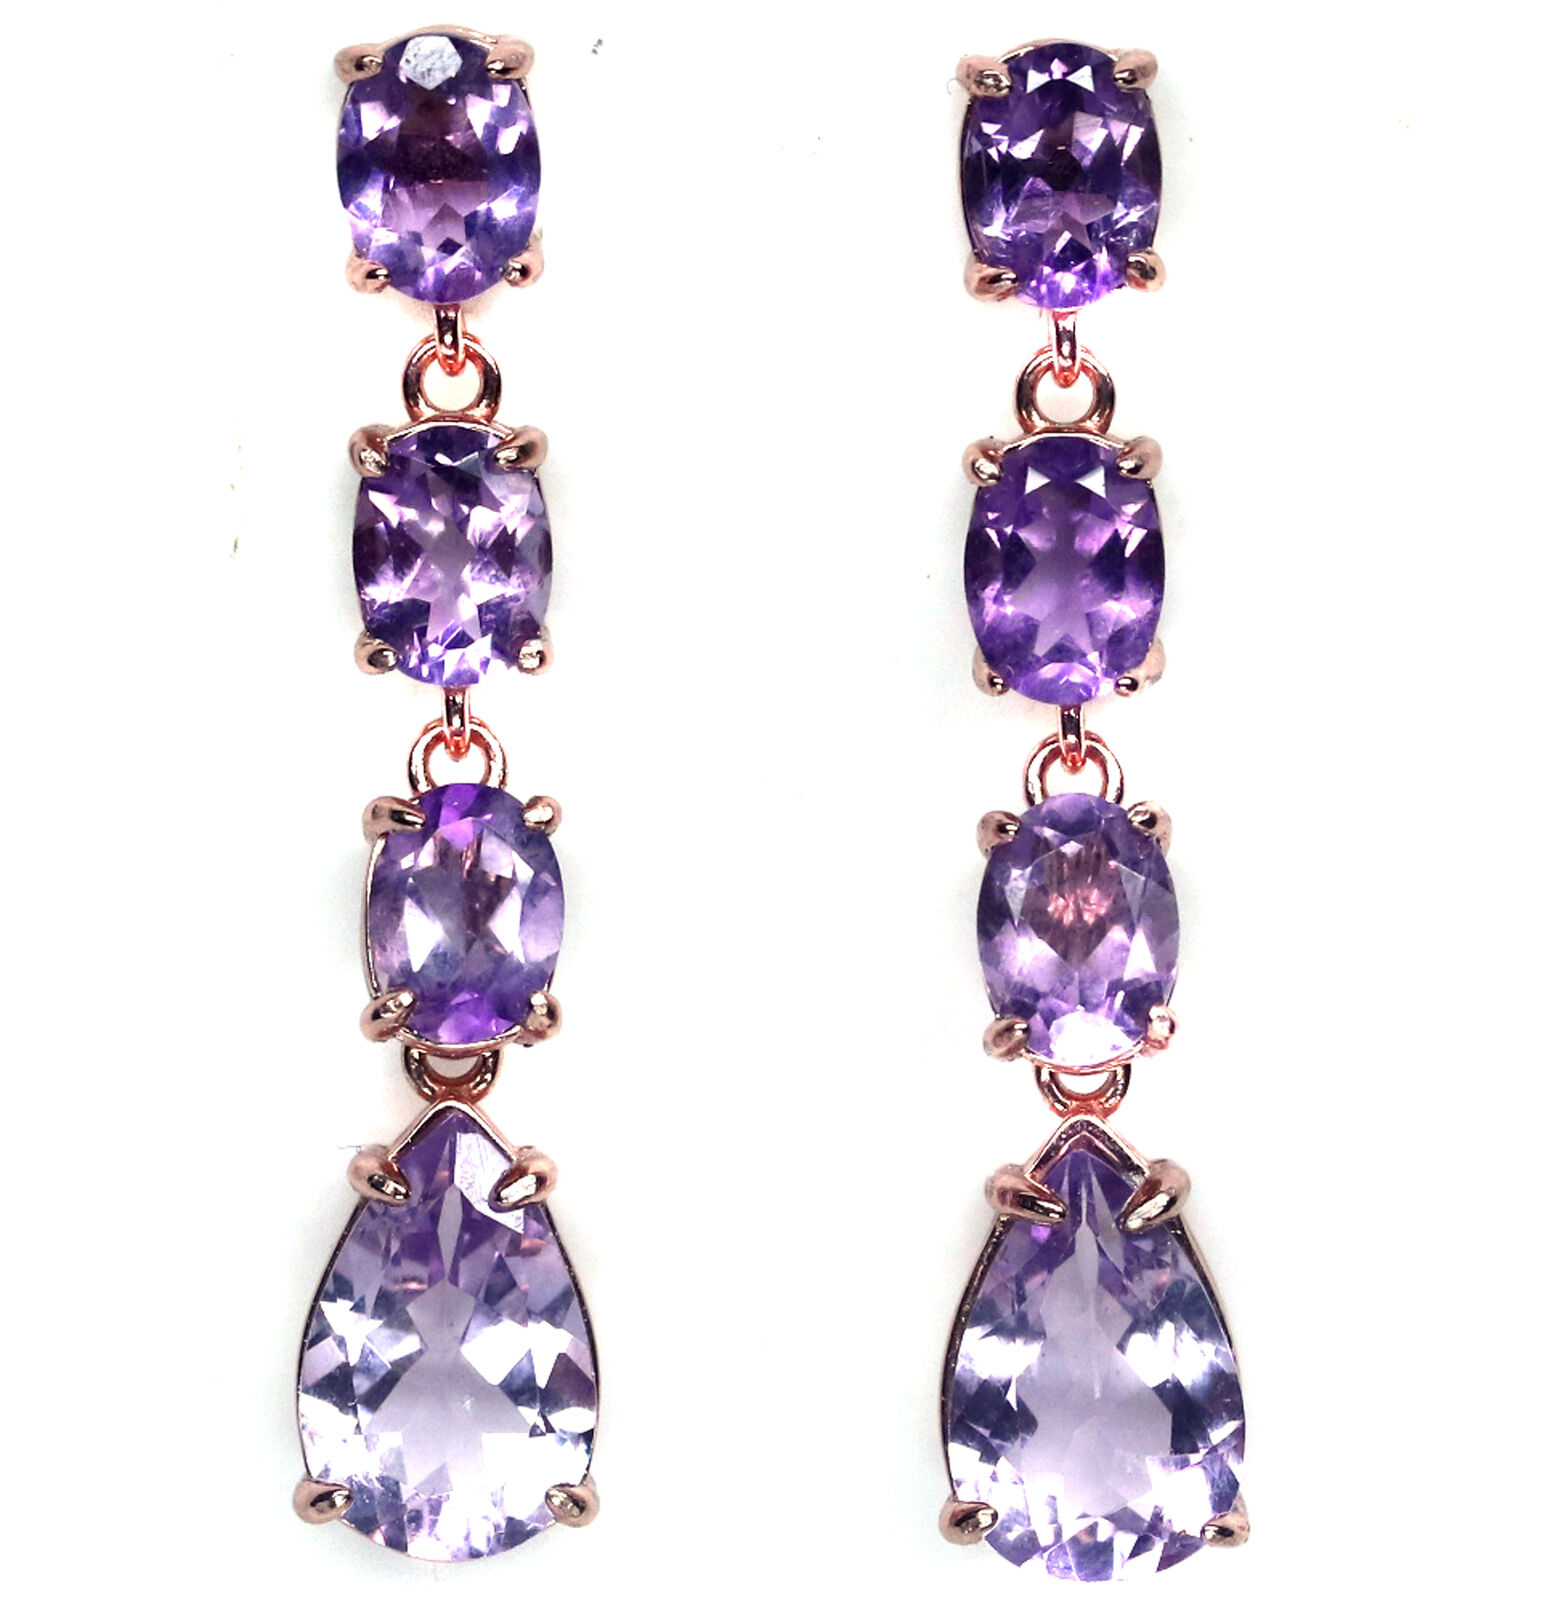 Image of 9 X 13 MM Rosa Con Ametista Viola Drop-Earrings Argento 925 Sterling